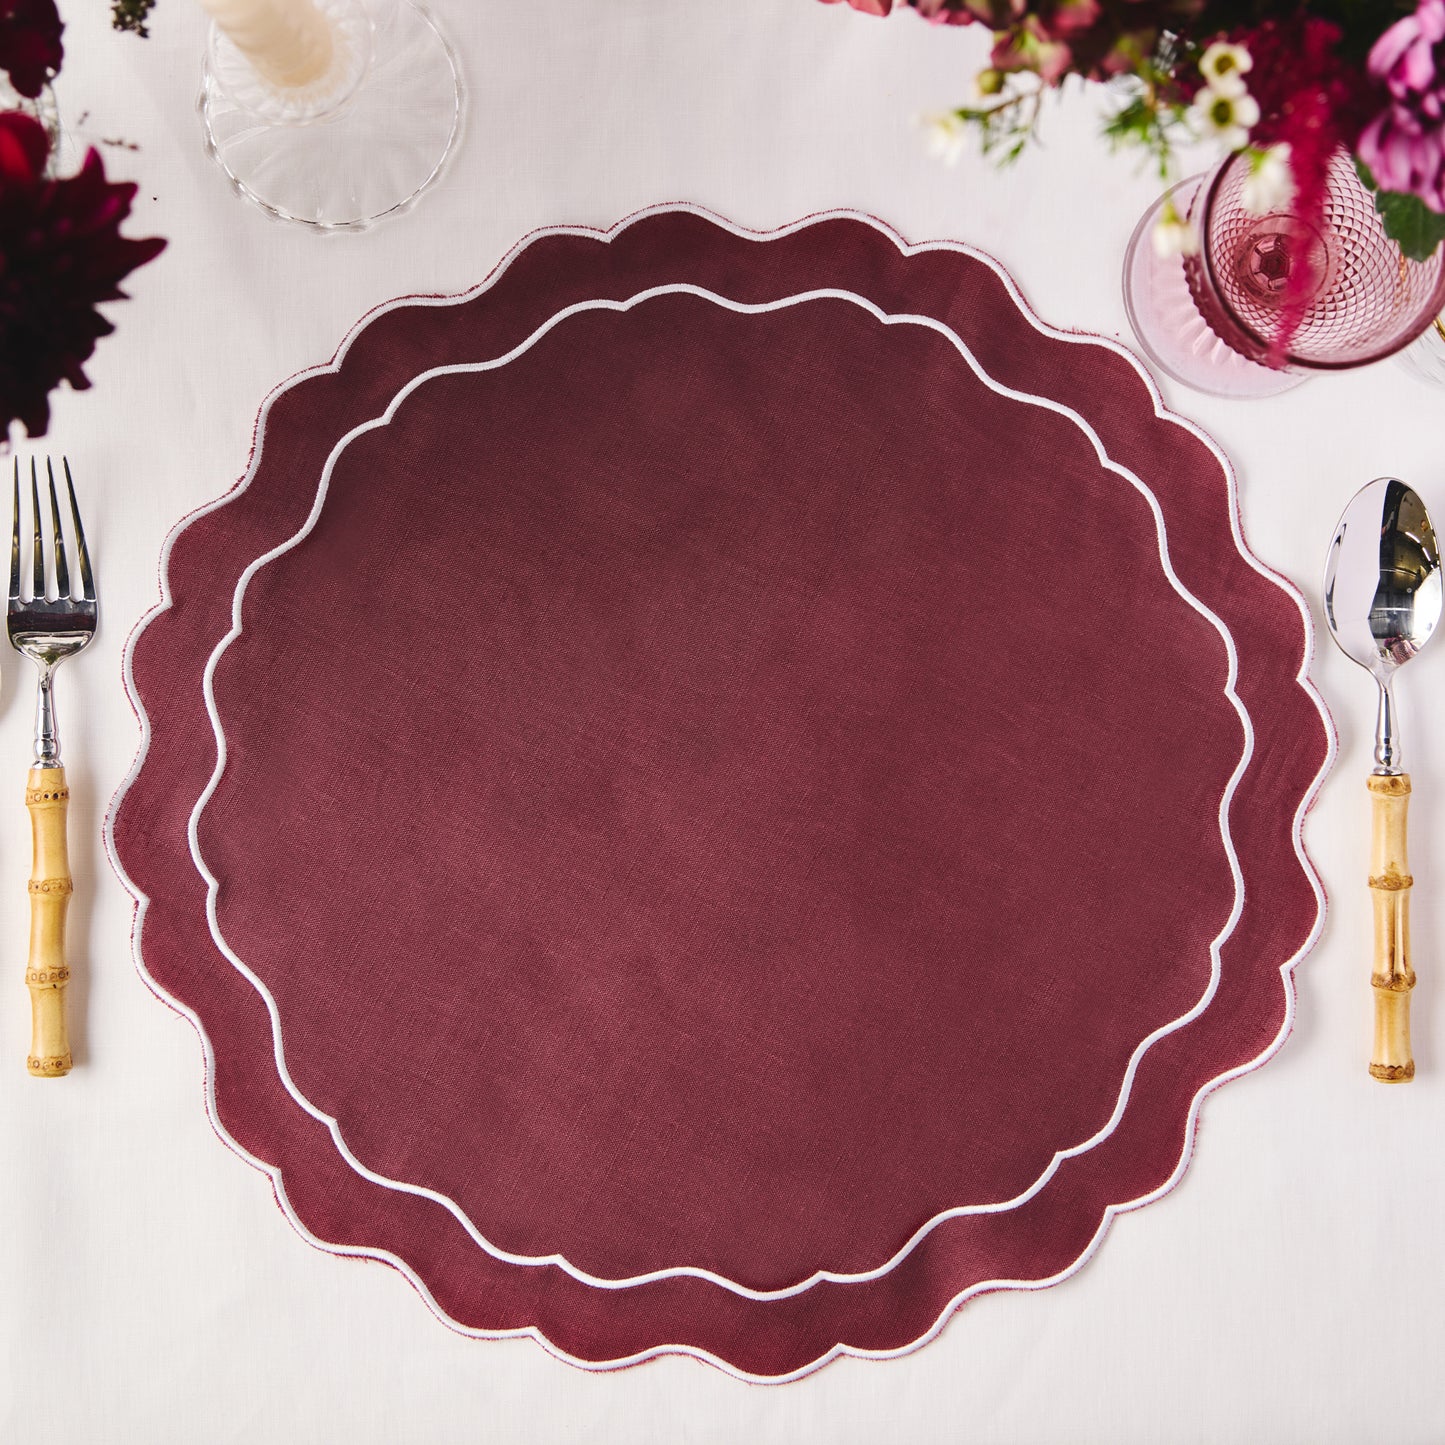 Set of 4 - Linen Scalloped Edged Placemats - Cherry Red